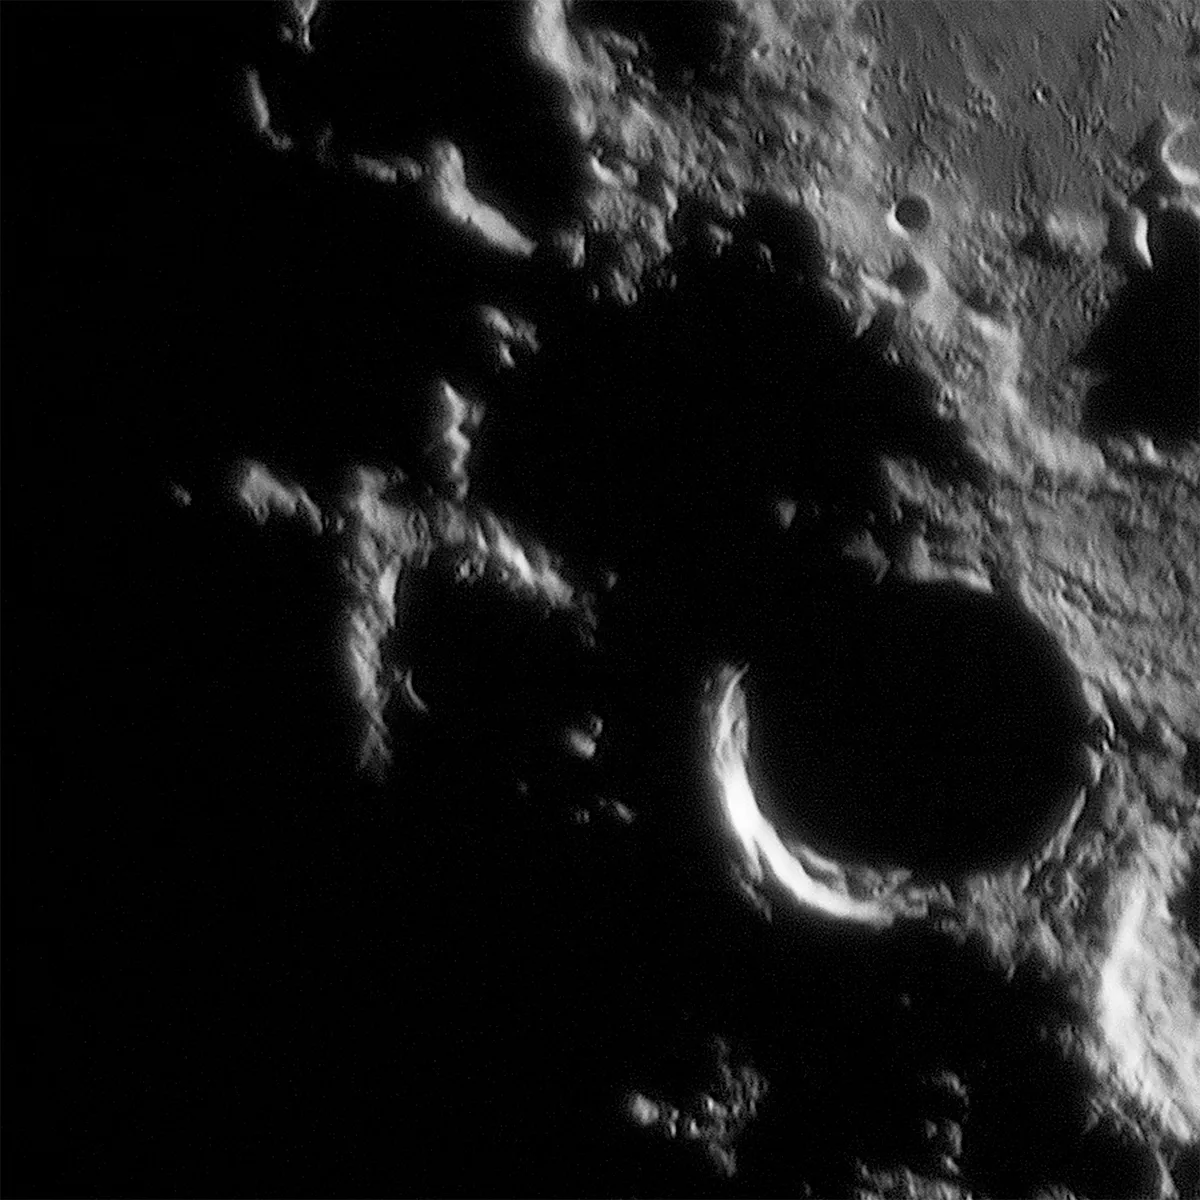 The Lunar X is one of the most famous effects highlighted by the Moon's terminator. Credit: Pete Lawrence